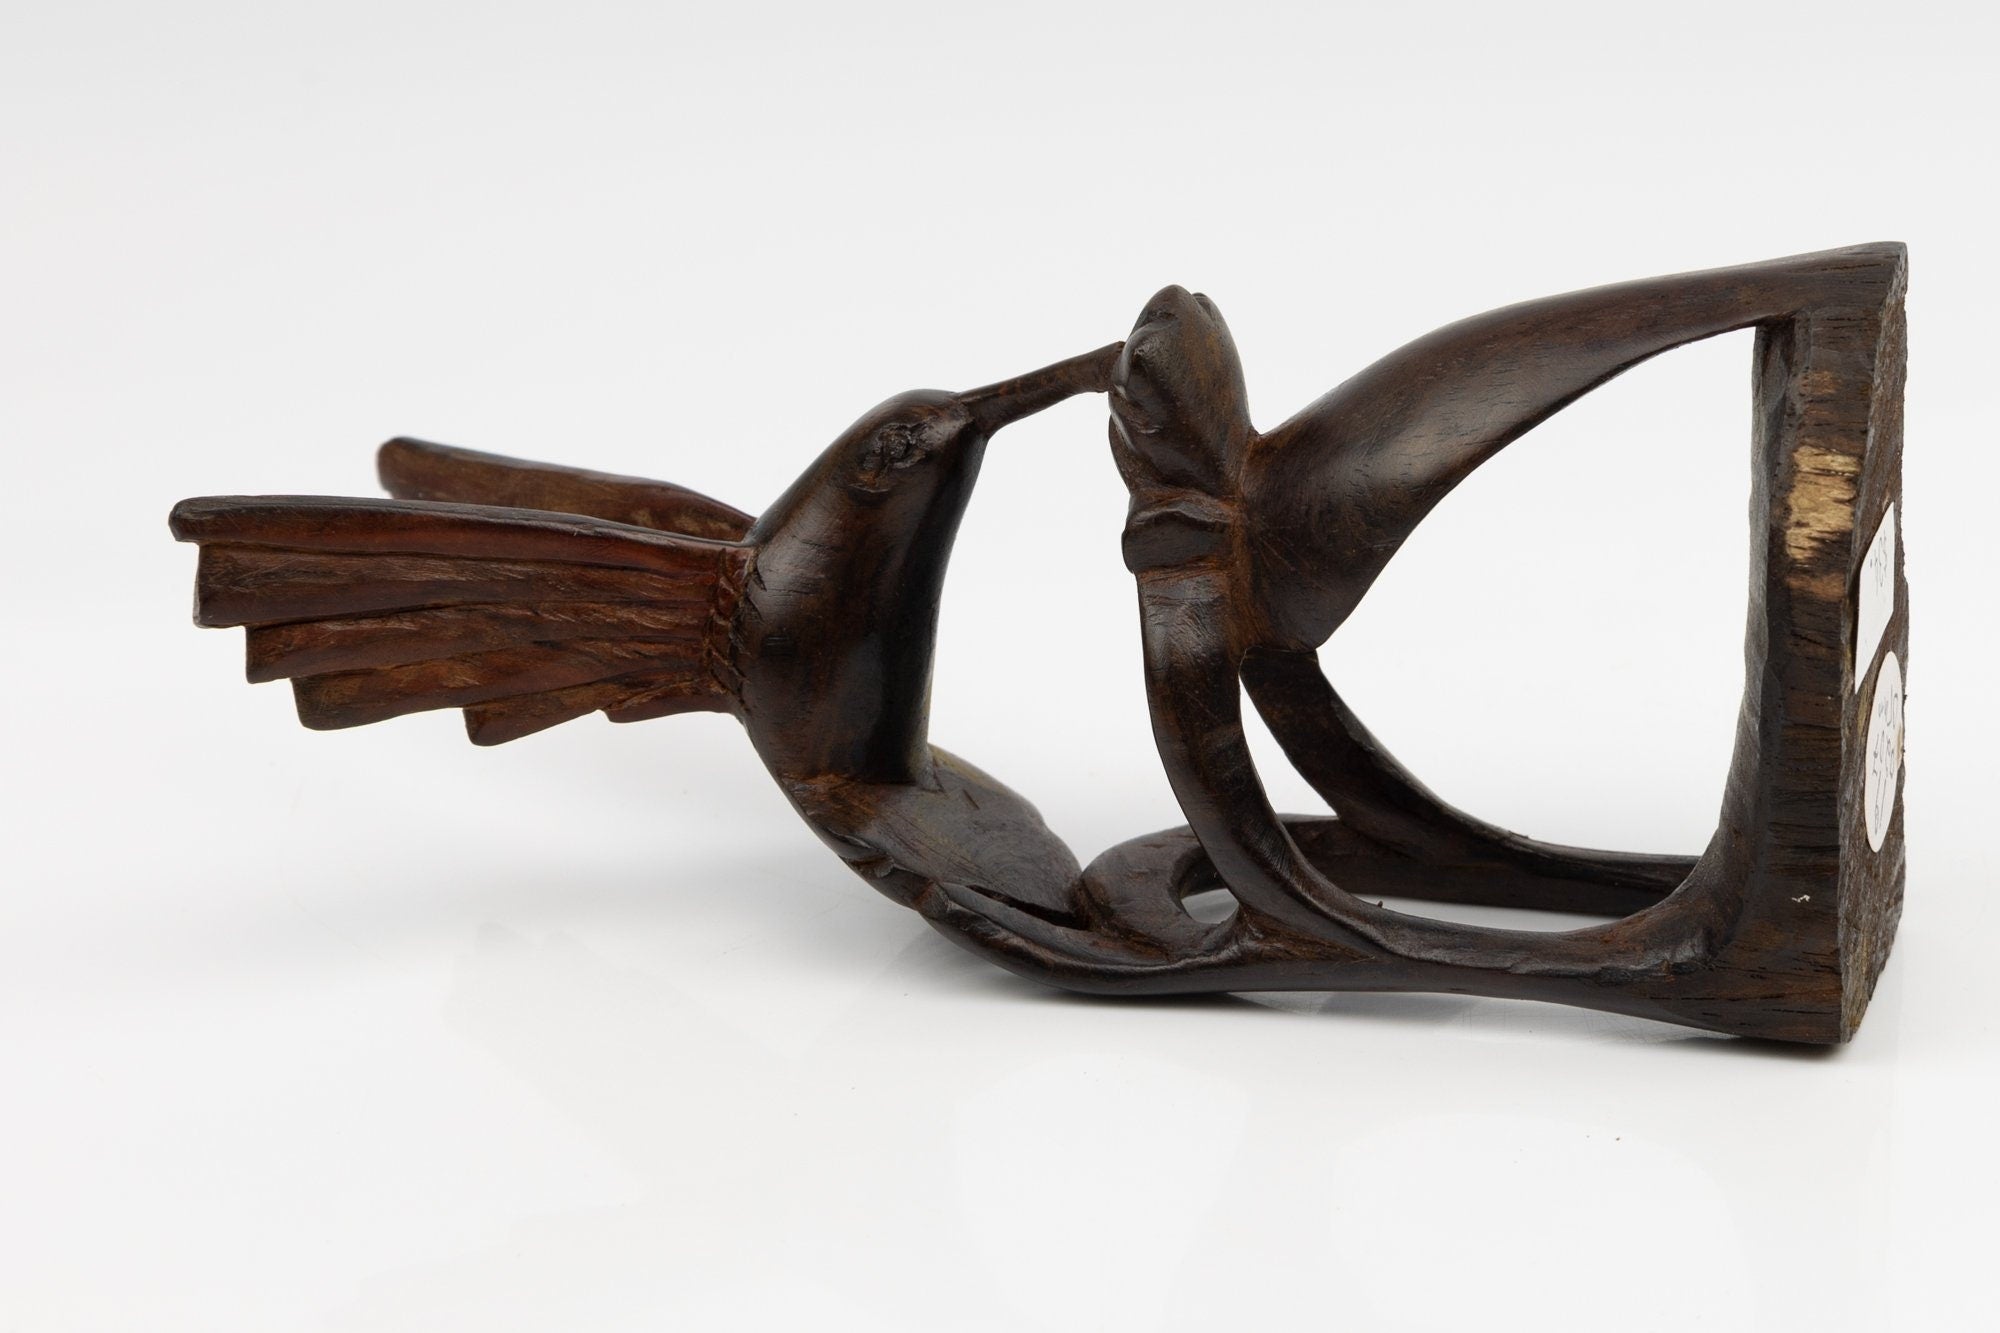 Hummingbird Hand Carved Cocobolo Wood Sculpture Made By Indigenous Artisans